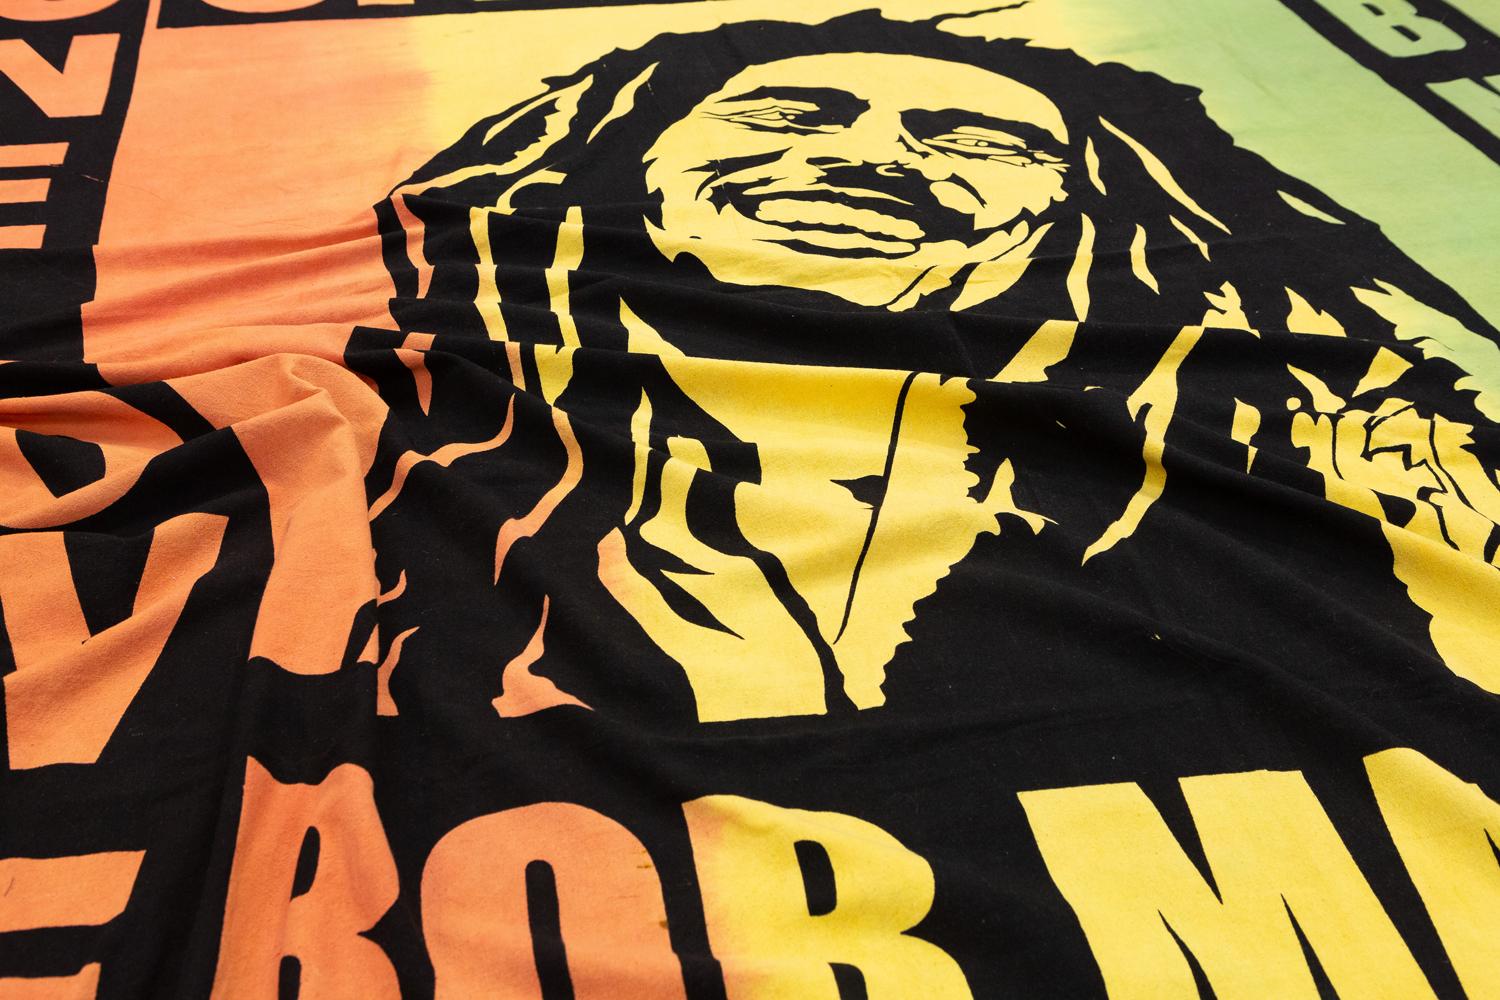 This is a 21st-century textile made using a printed stamp technique and was woven in America. It depicts Bob Marley and one of his most famous and influential songs “one love” and is made up of three different colors starting on the left with orange